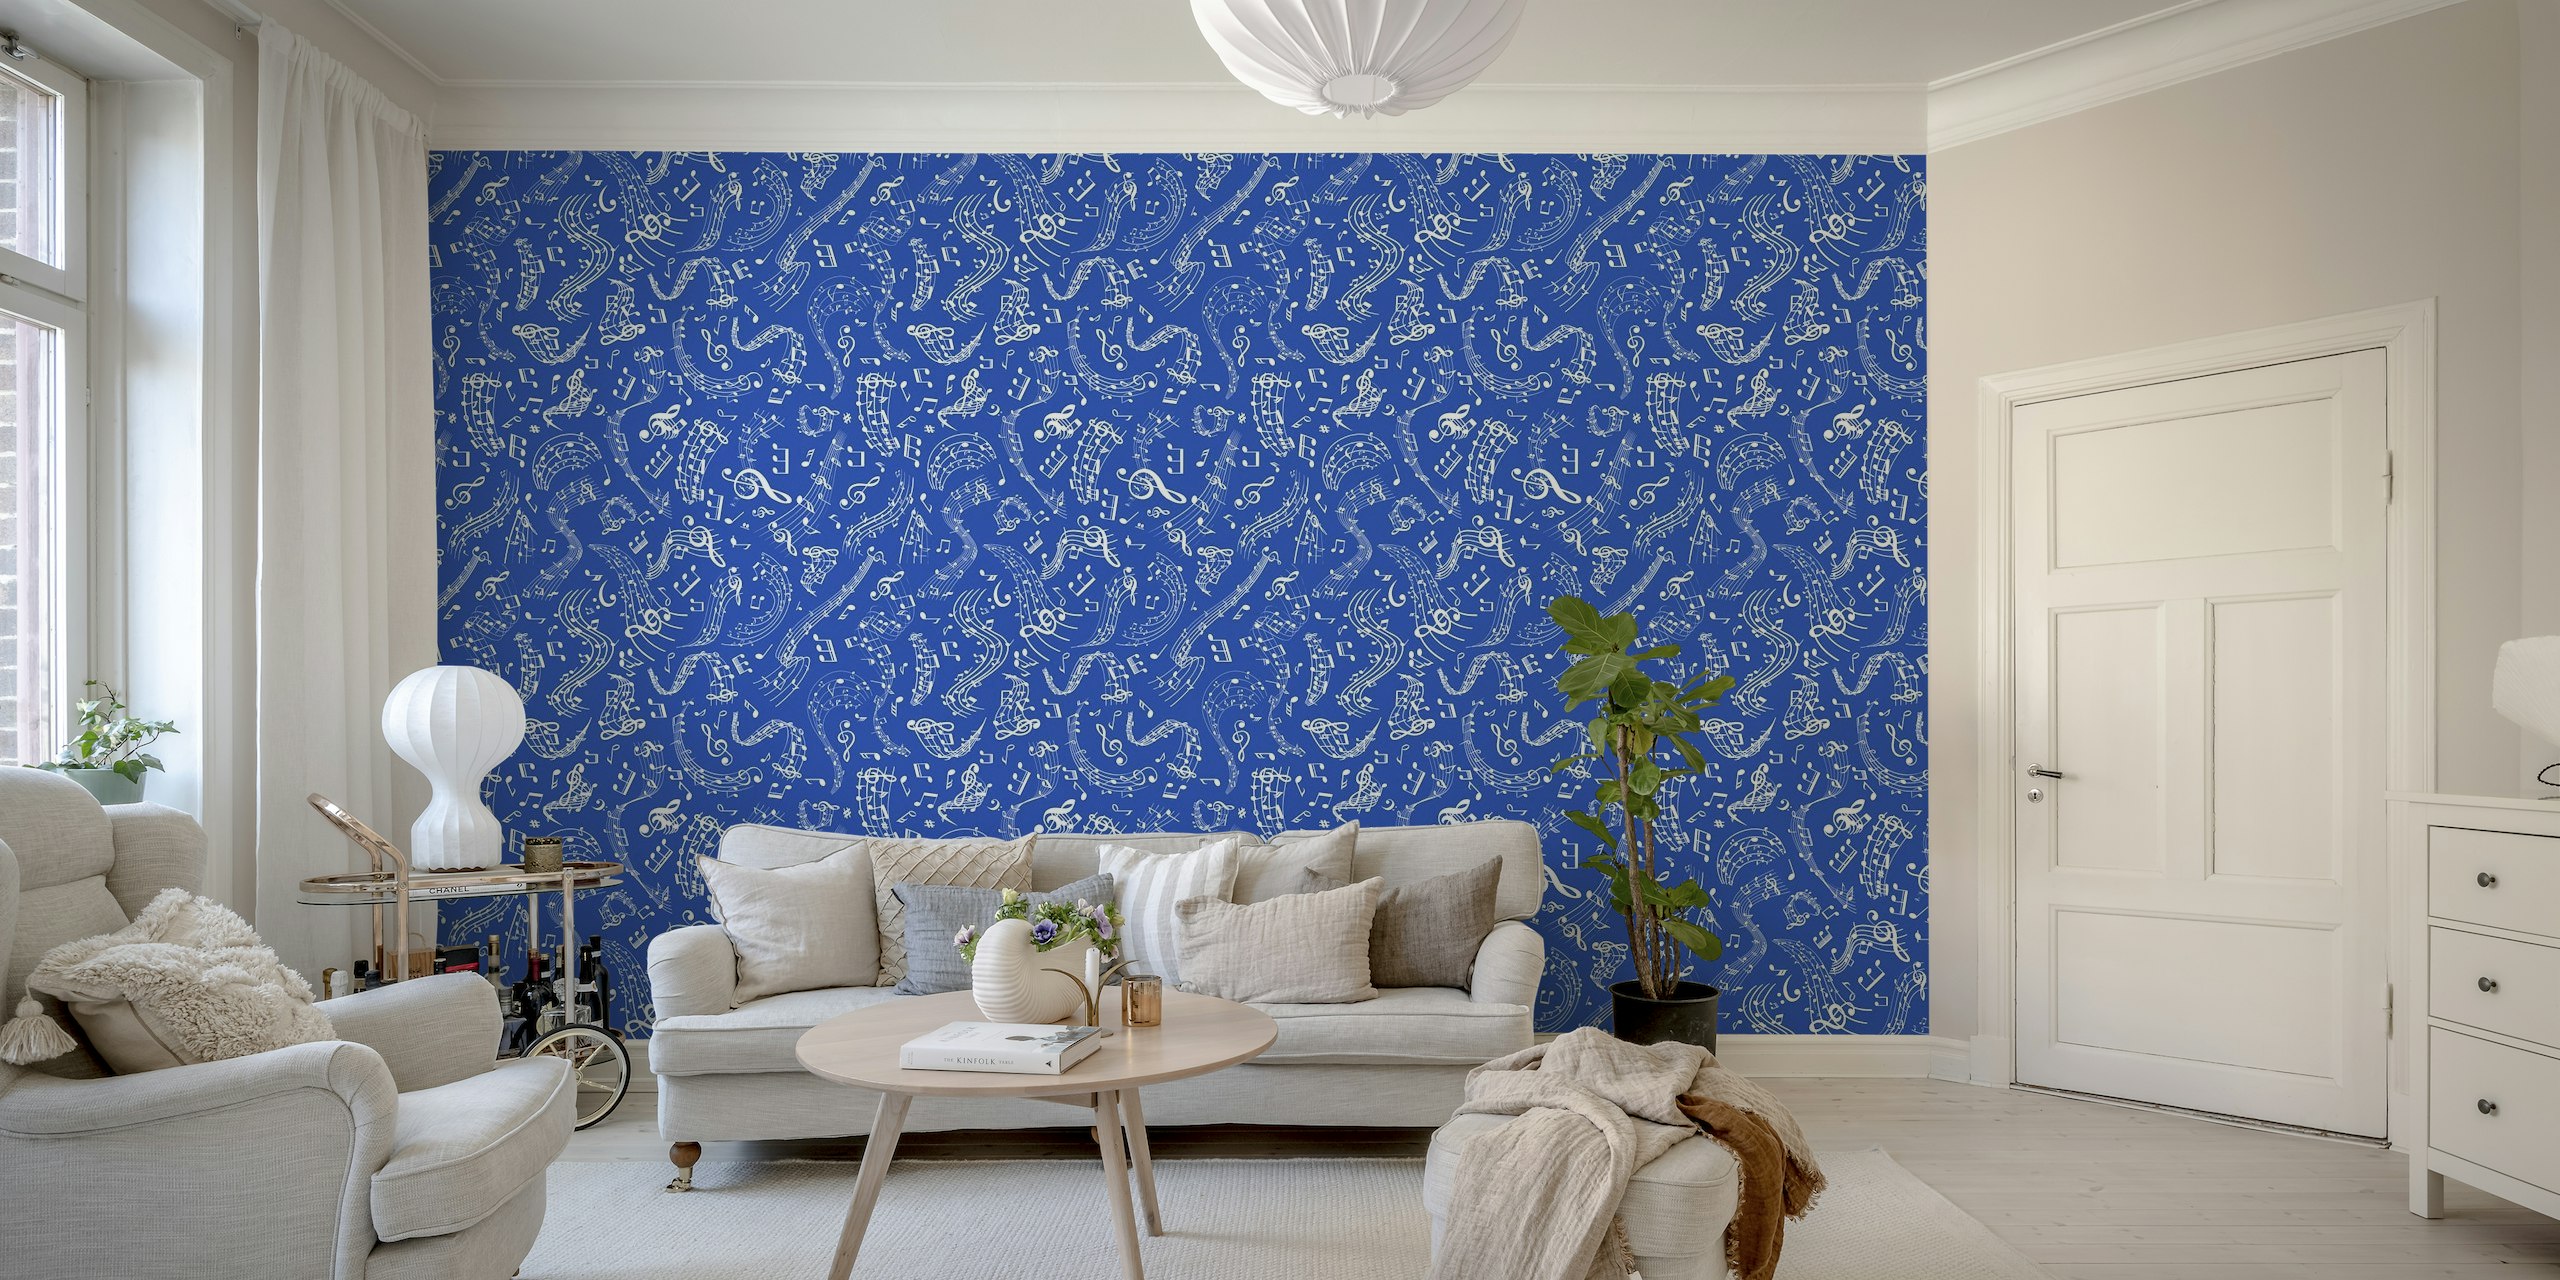 Cobalt blue wall mural with white music notes and symbols pattern